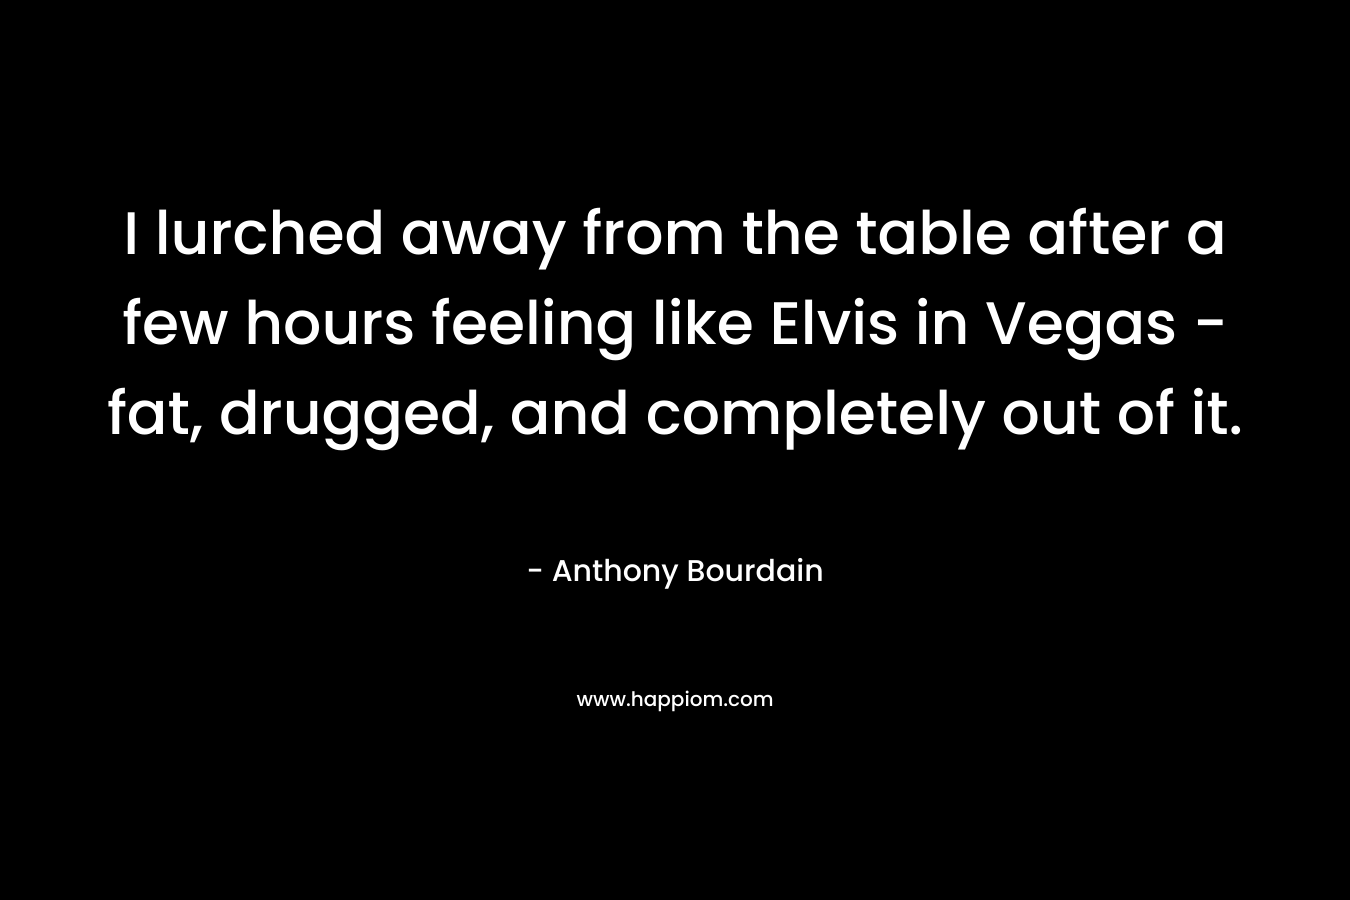 I lurched away from the table after a few hours feeling like Elvis in Vegas – fat, drugged, and completely out of it. – Anthony Bourdain